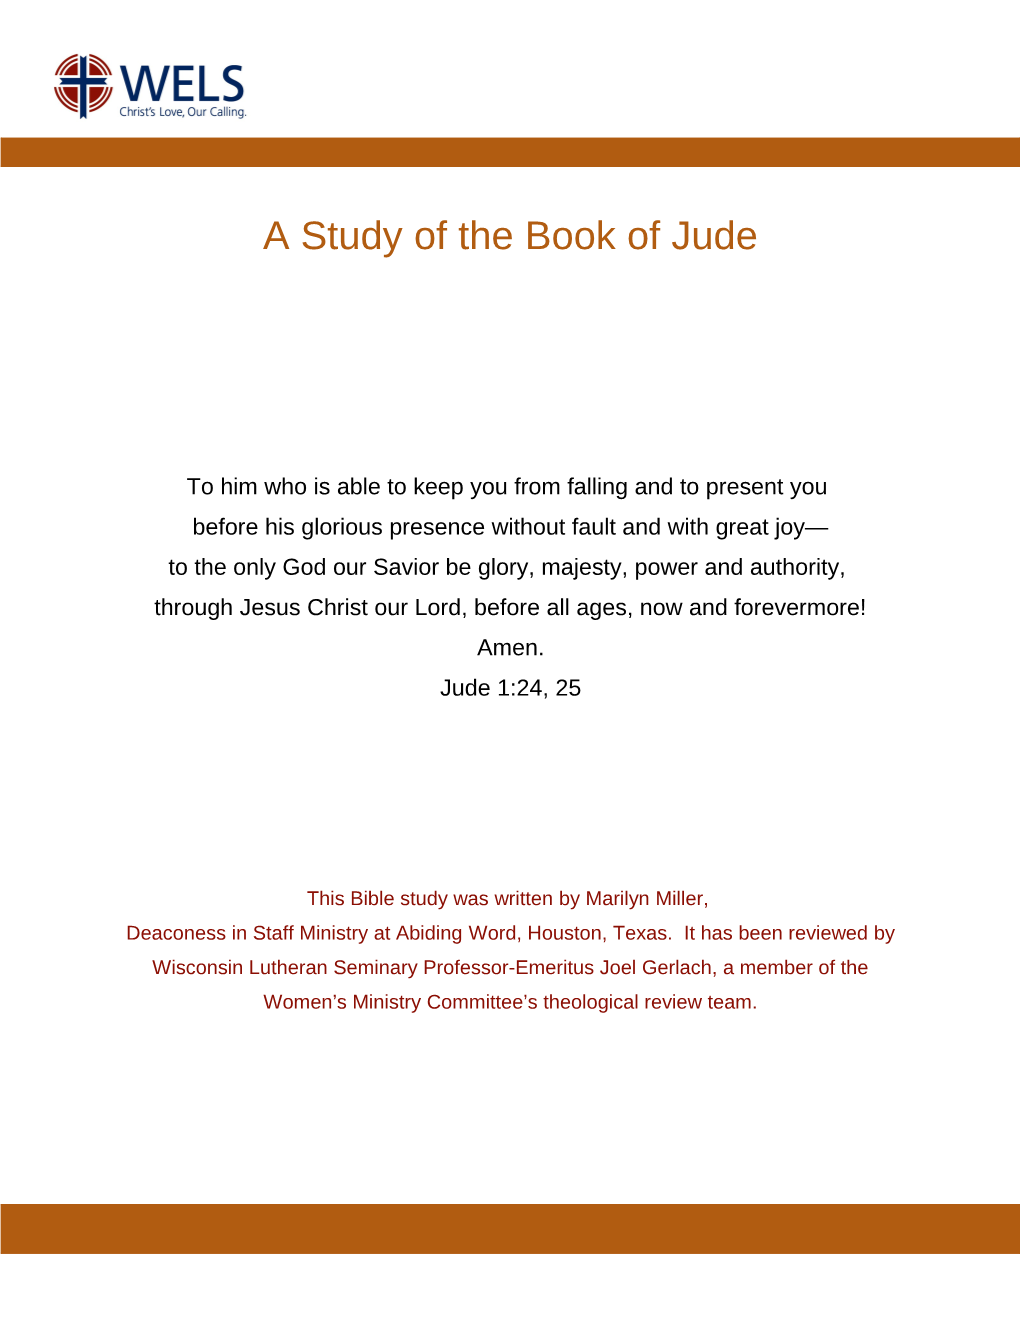 A Study of the Book of Jude